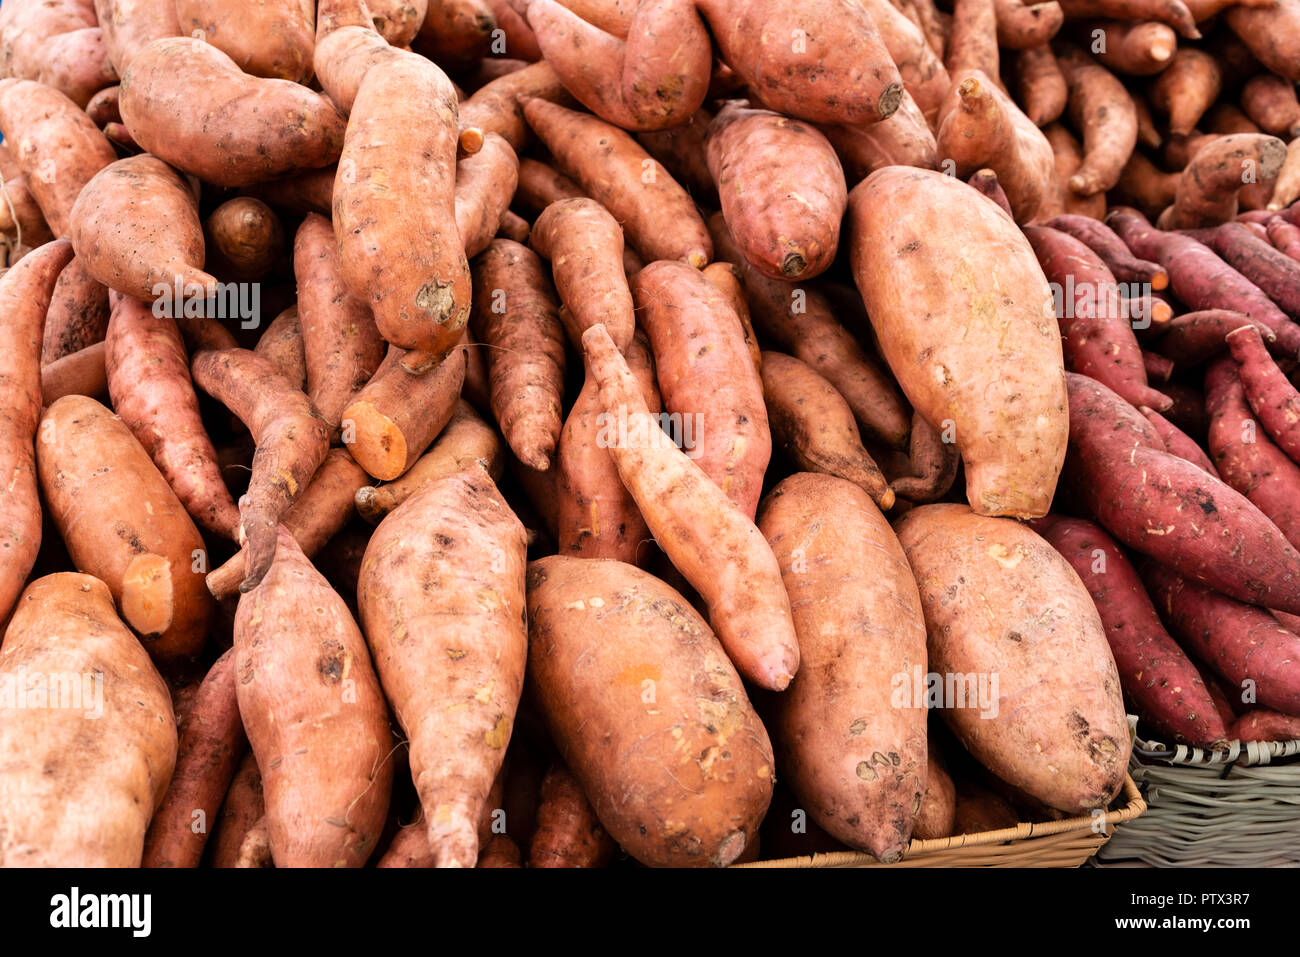 Sweet potatoes on display at the farmers market Stock Photo